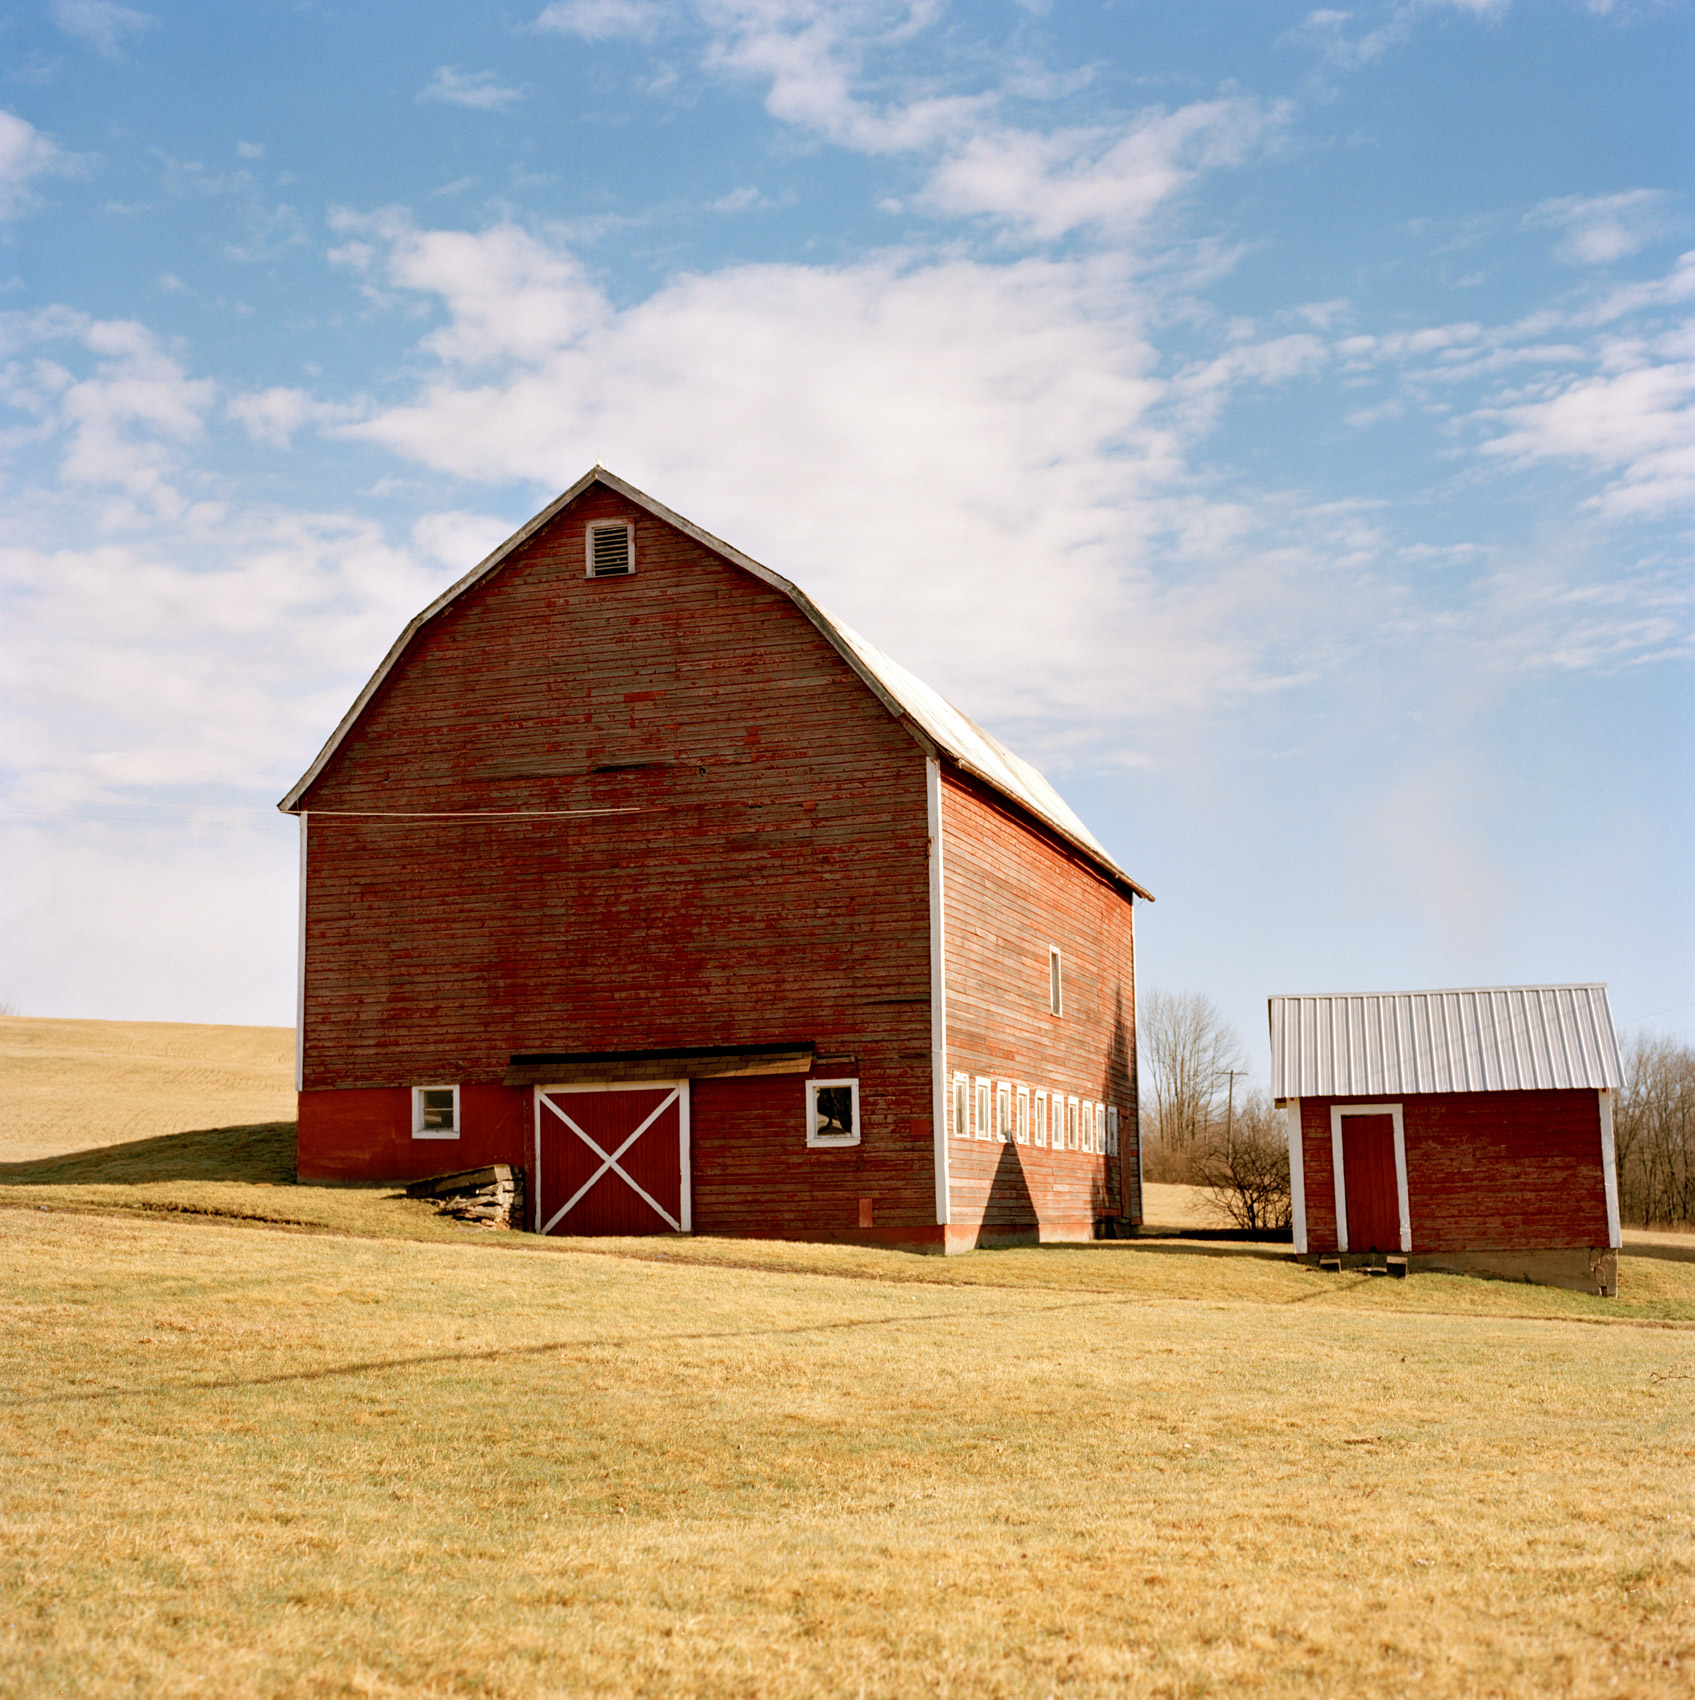 A-RED-BARN-IN-UPSTATE-NEW-YORK-BASKING-IN-THE-MORNING-SUN